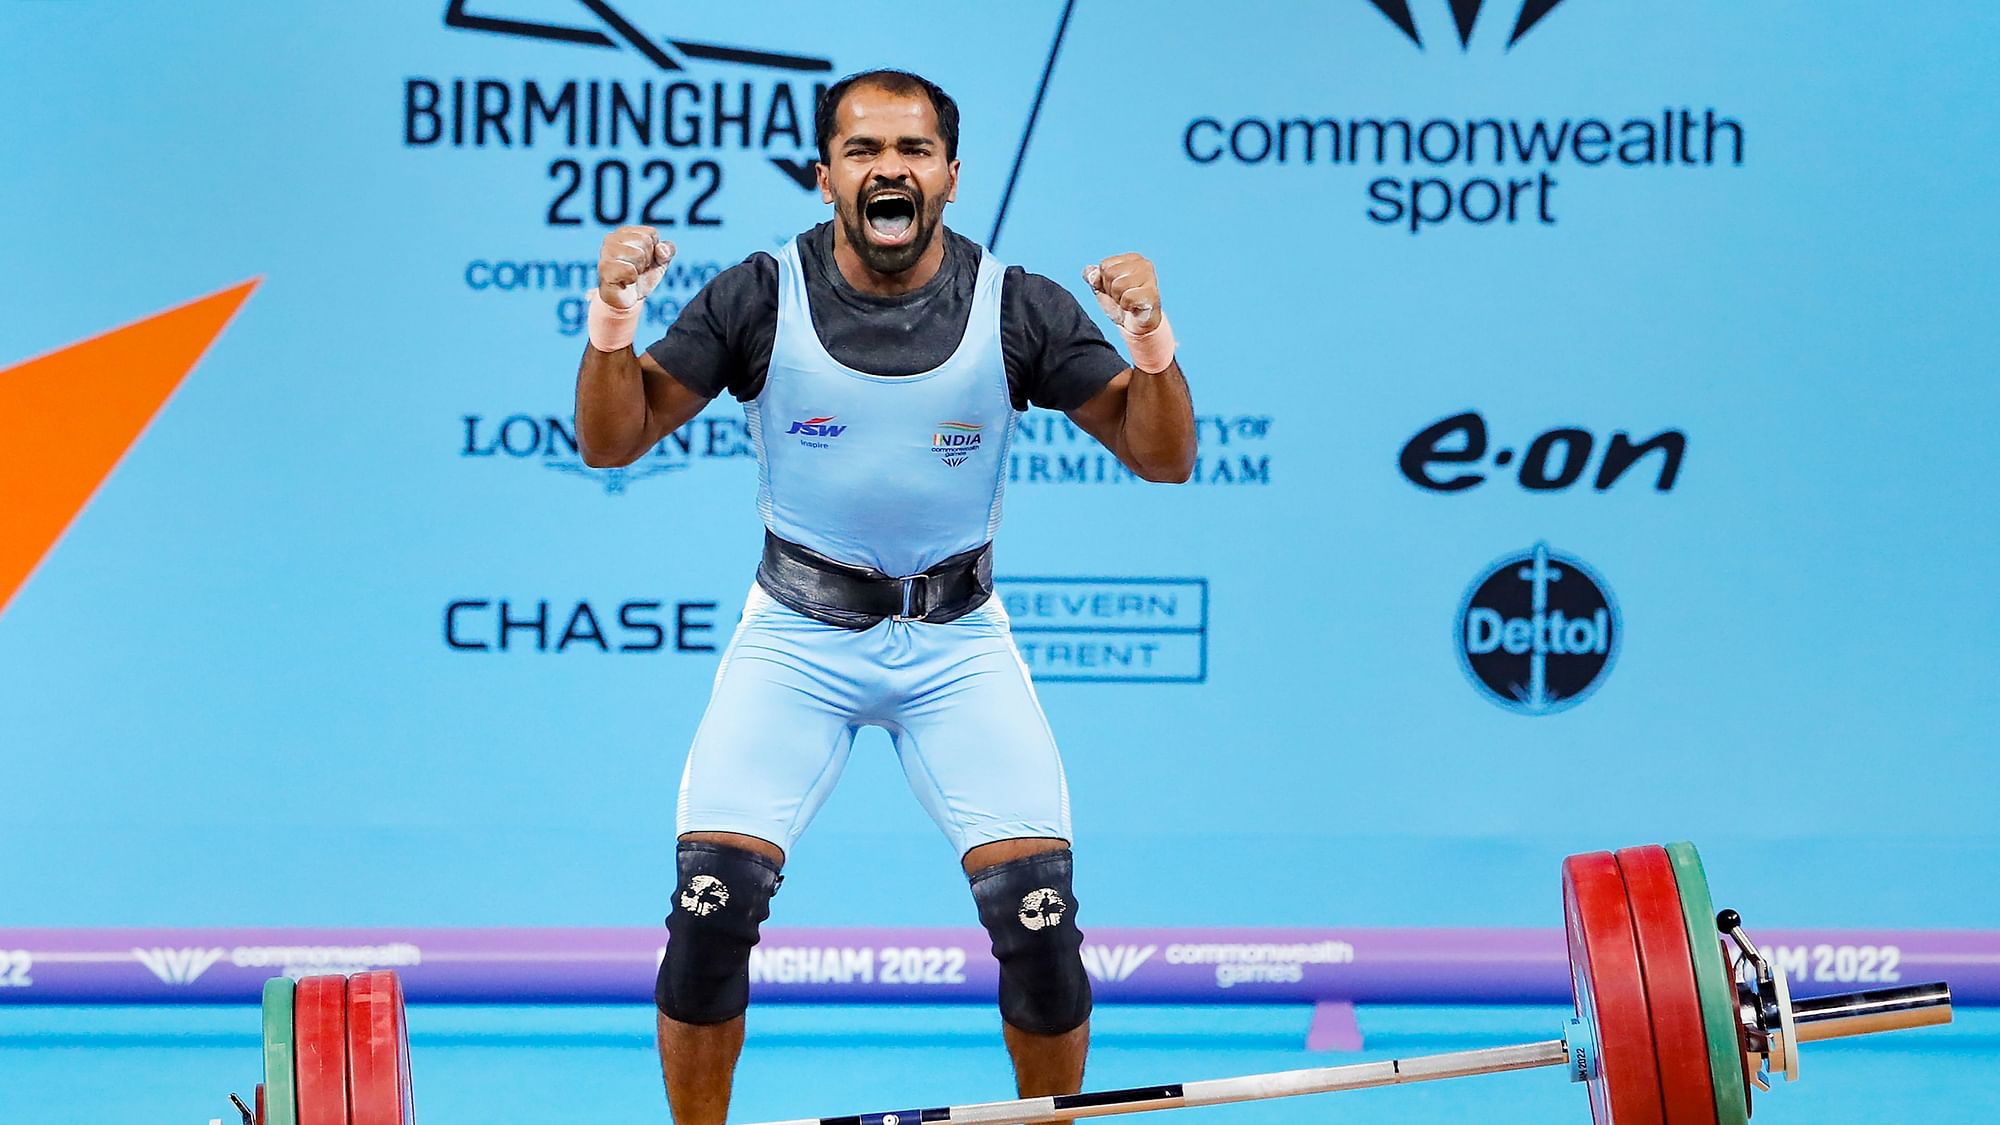 Sacrifices Have Paid Off Weightlifter Gururaja Poojary After Winning Bronze medal at the Commonwealth Games 2022